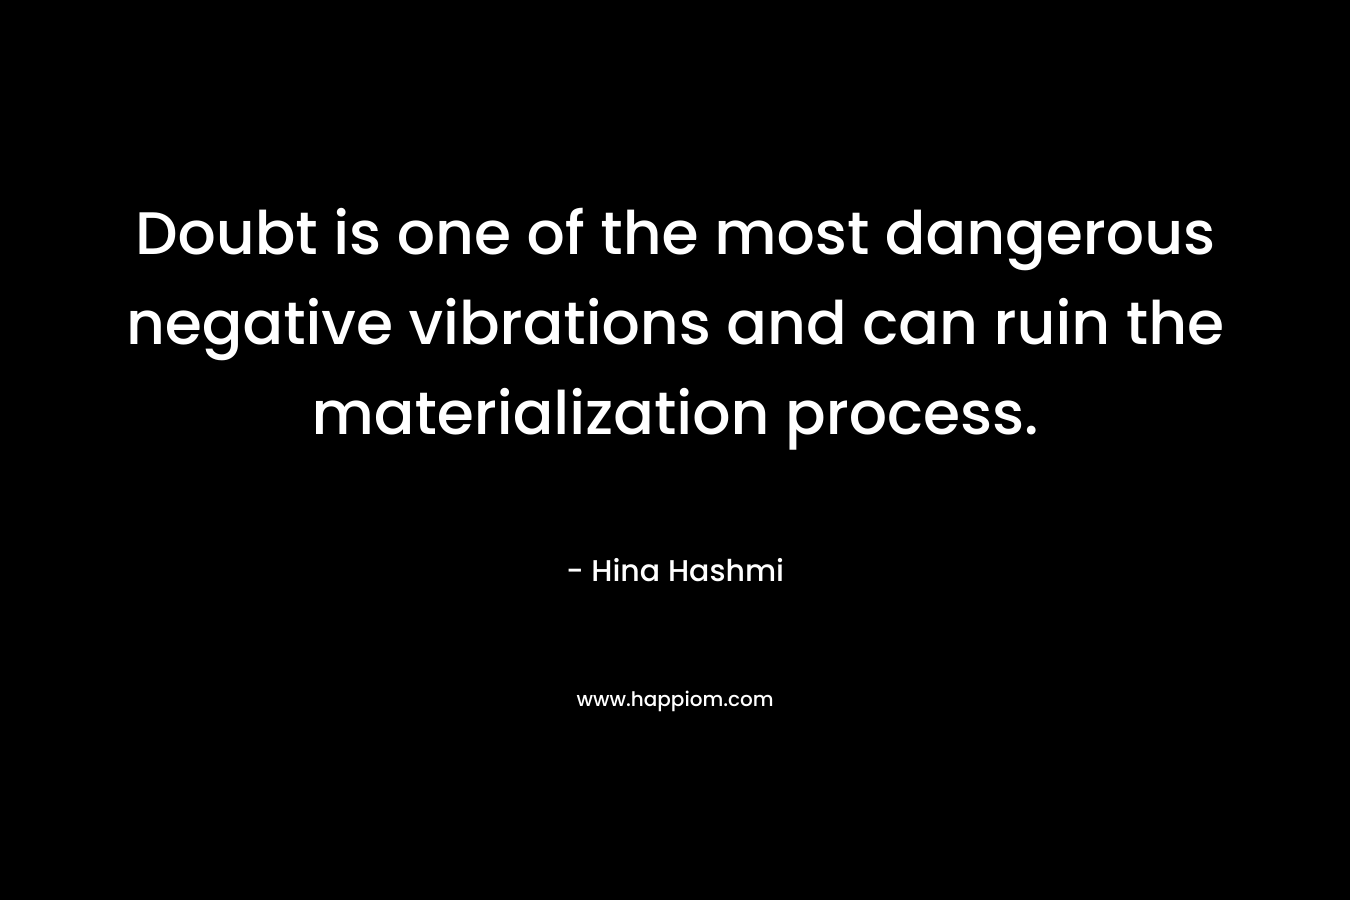 Doubt is one of the most dangerous negative vibrations and can ruin the materialization process. – Hina Hashmi